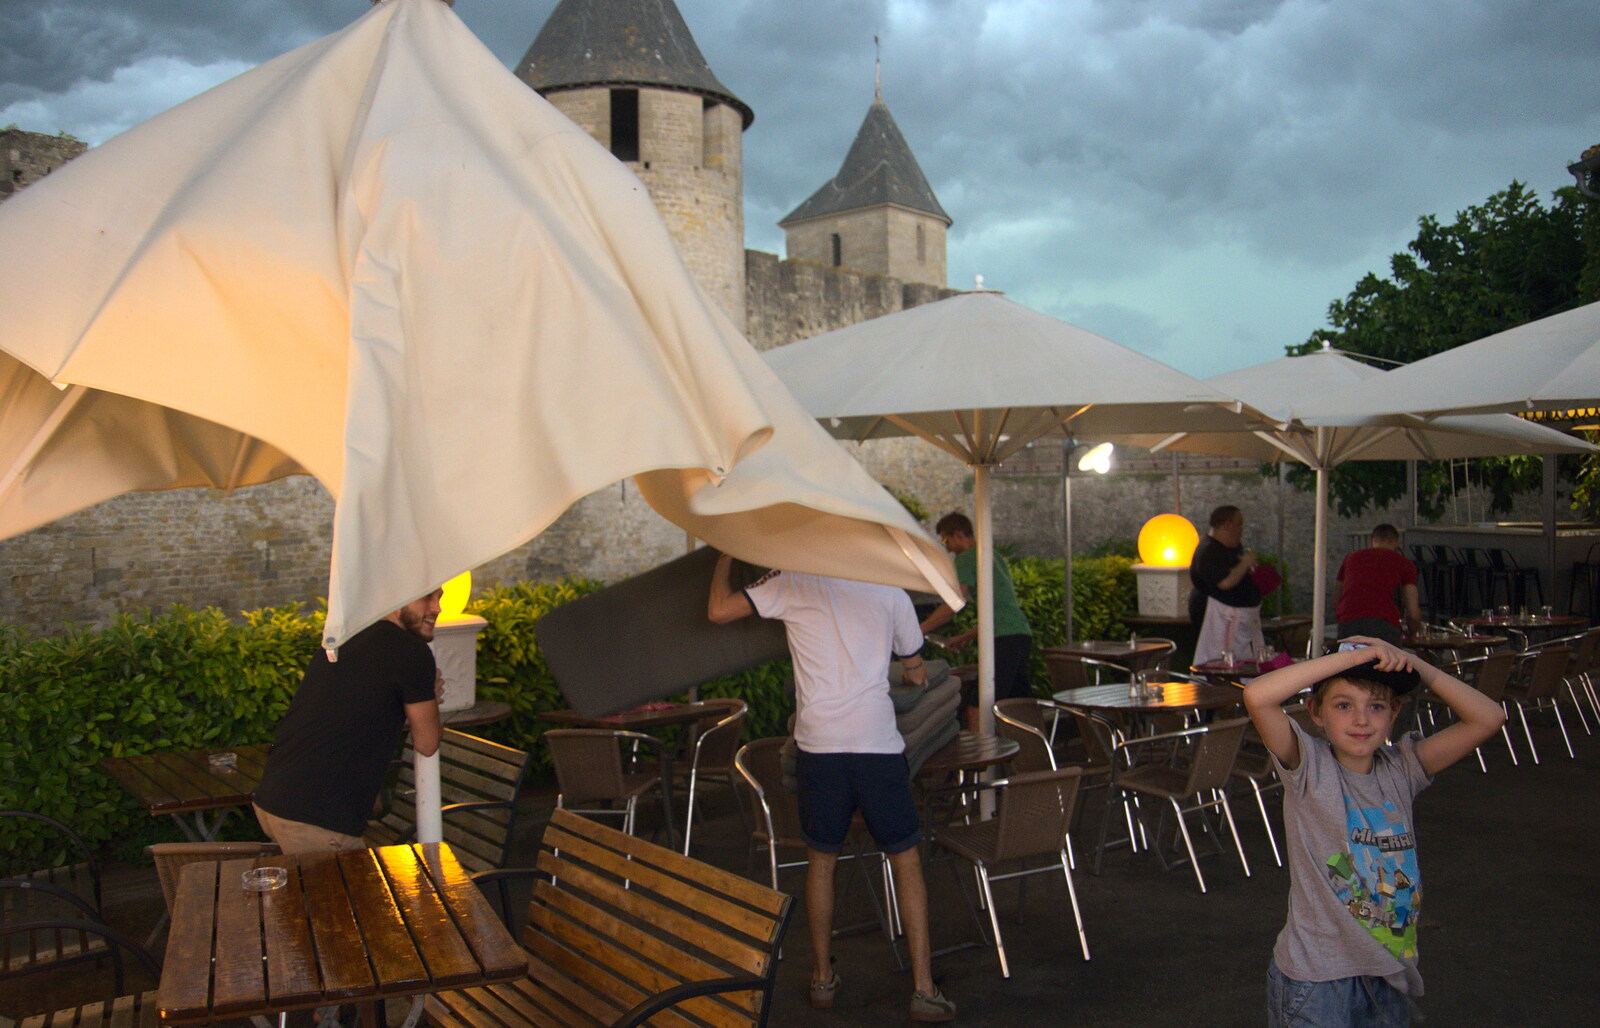 The bar staff take the parasols in from A Trip to Carcassonne, Aude, France - 8th August 2018